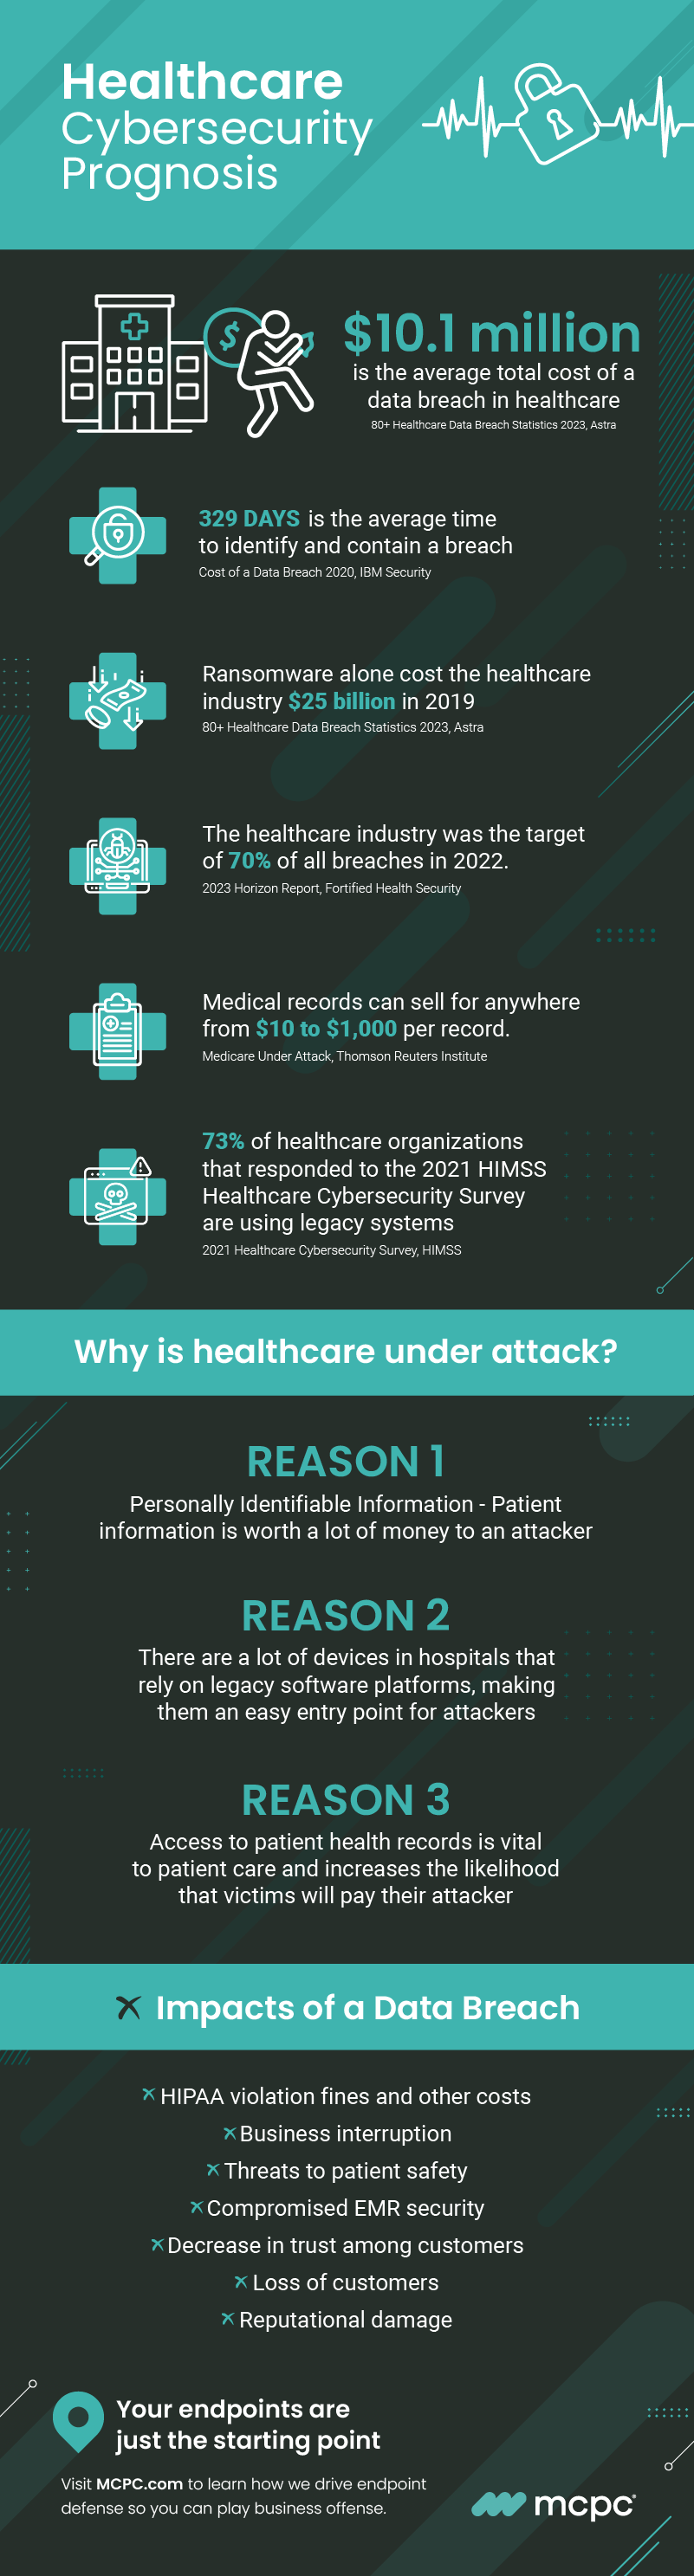 Infographic entitled Healthcare Cybersecurity Prognosis shows cybersecurity statistics for healthcare organizations.